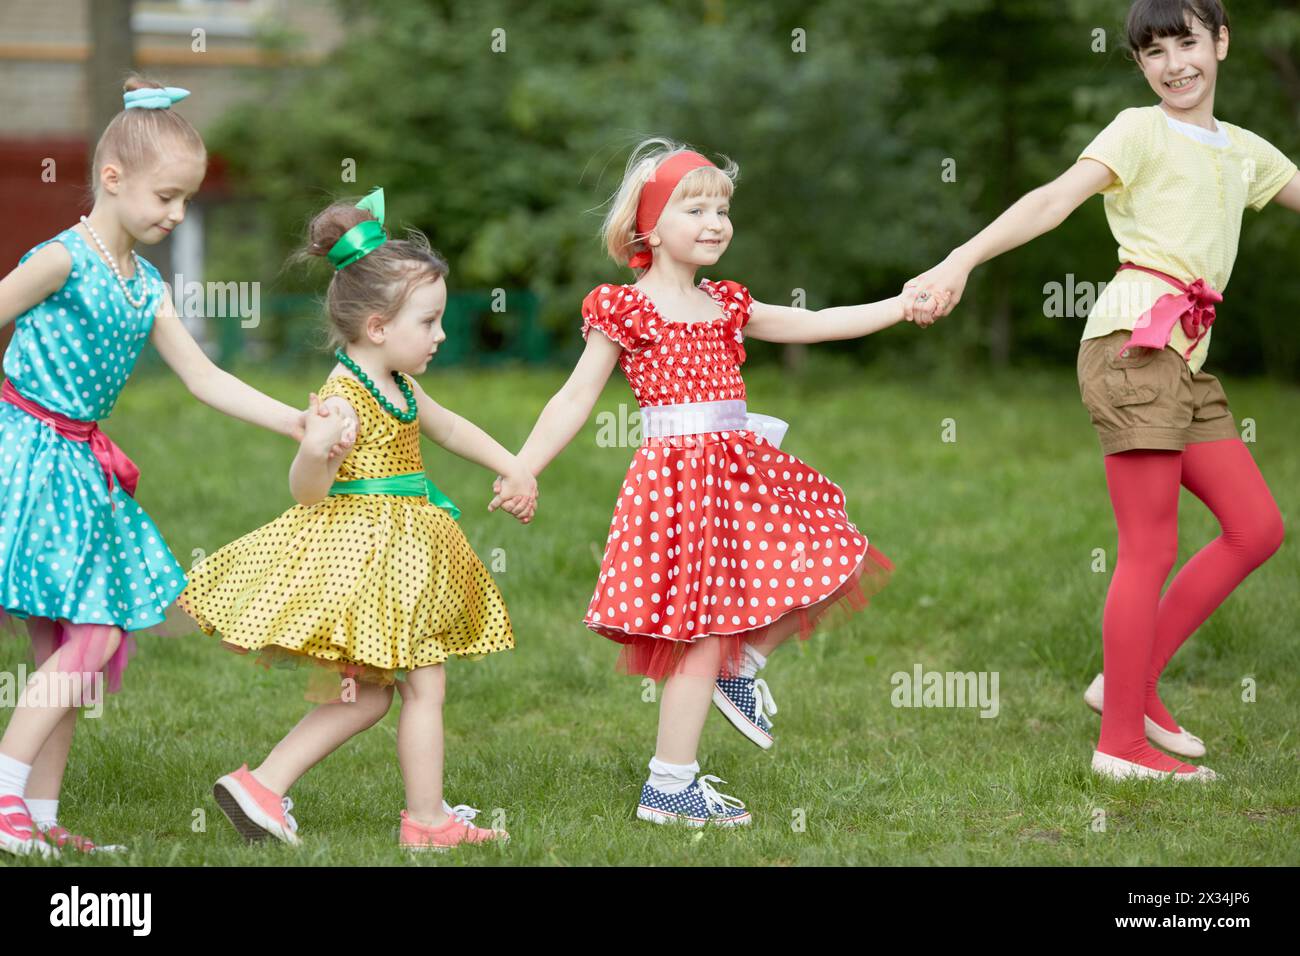 Four girls dance holding hands at grassy lawn. Stock Photo